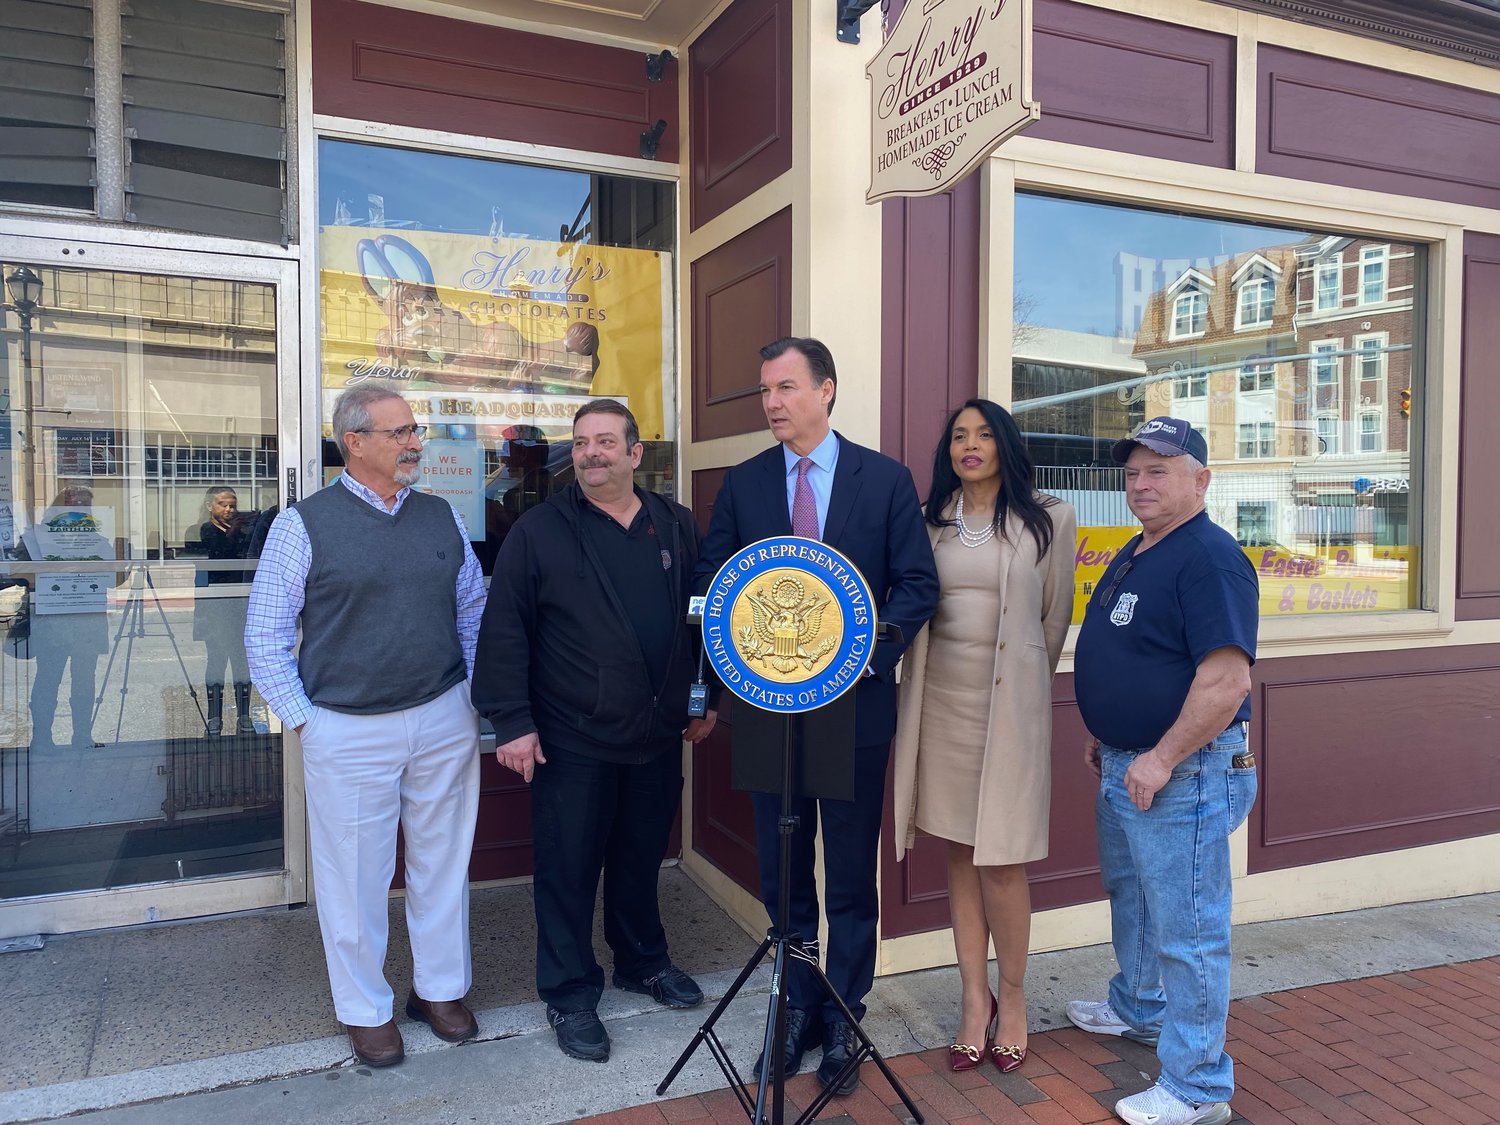 Glen Floors co-owner Michael Capobianco, far left, Henry’s Confectionery owner Joe Valensisi, U.S. Rep. Tom Suozzi, BID Executive Director Patricia Holman, and Laura’s BBQ owner Lloyd Adams called on the Senate to pass the bill to revitalize restaurants and small businesses that have faced the financial effects of the pandemic.